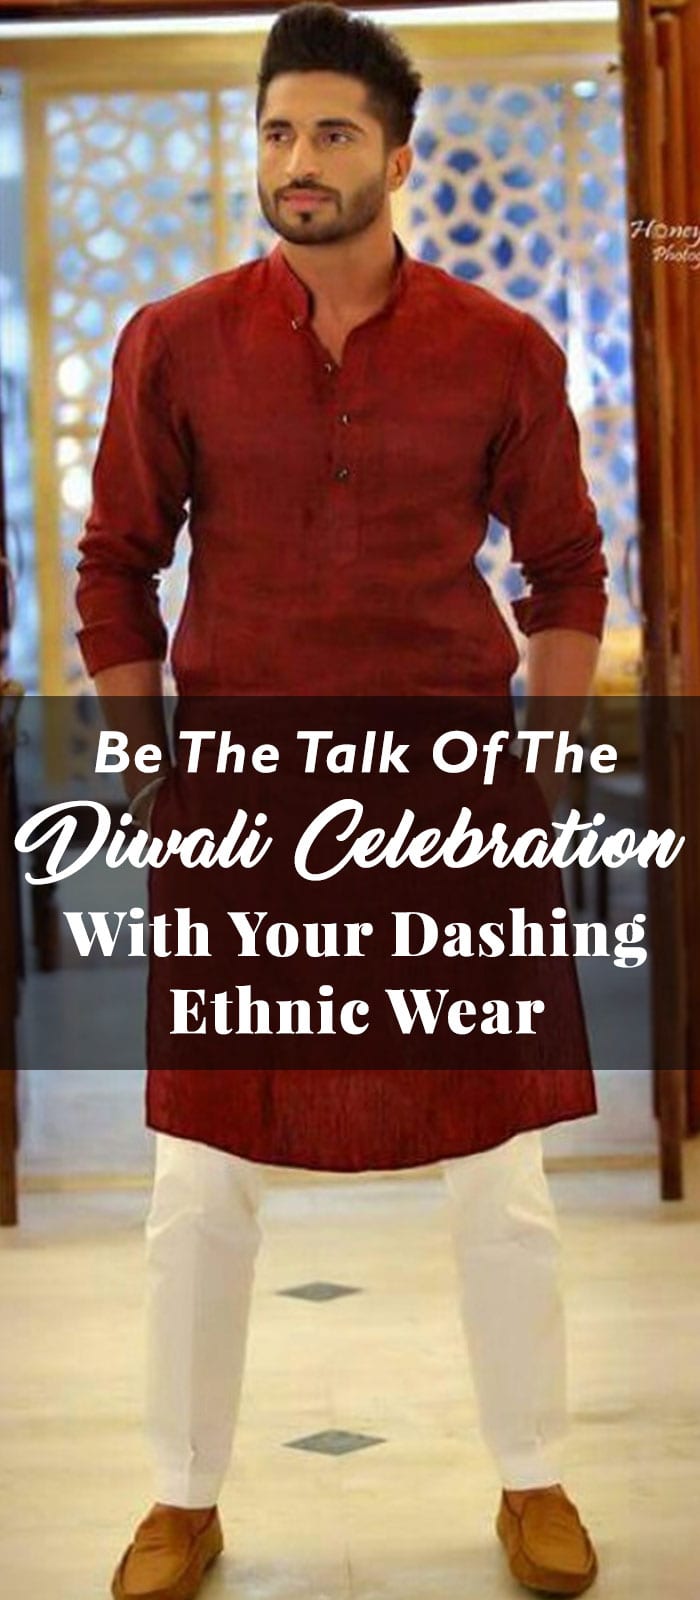 Be The Talk Of The Diwali Celebration With Your Dashing Ethnic Wear